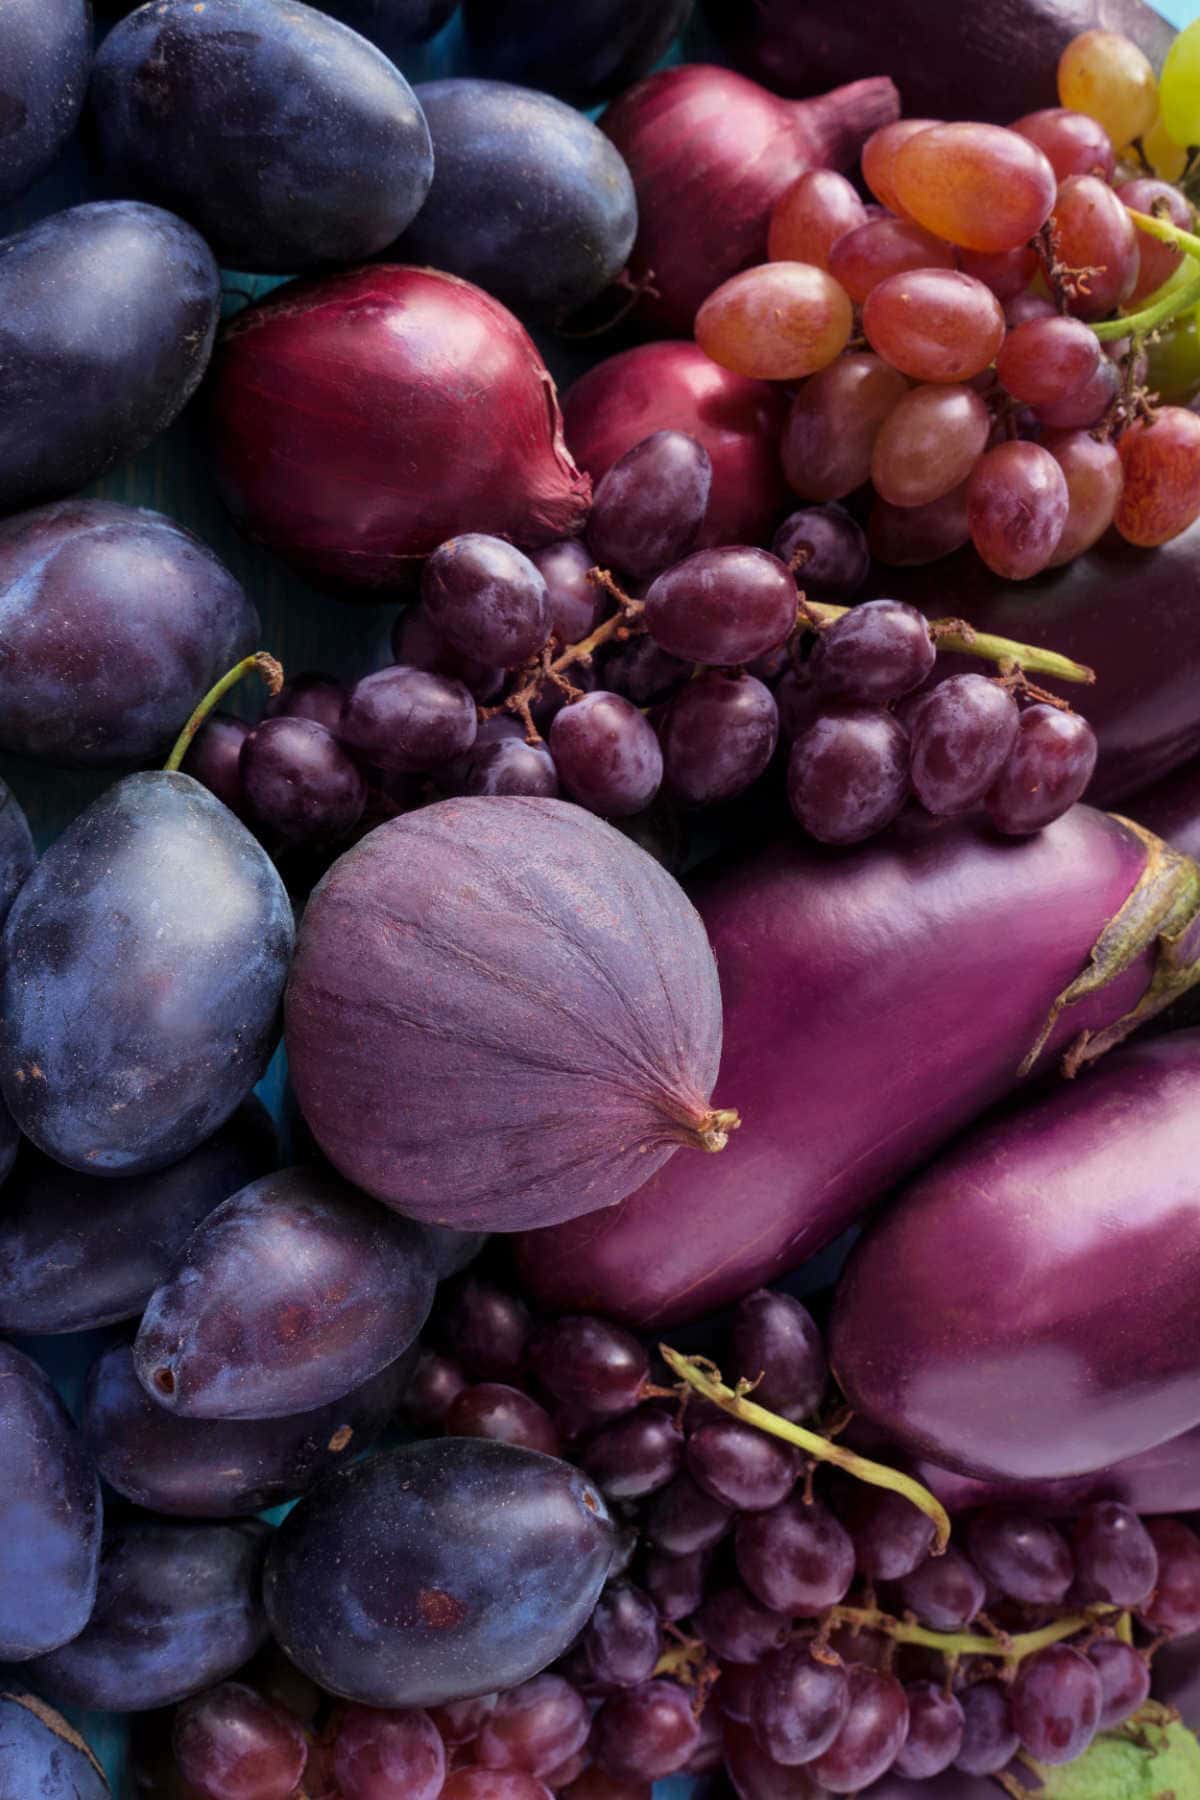 Purple fruits of grapes, eggplant, figs, plums.